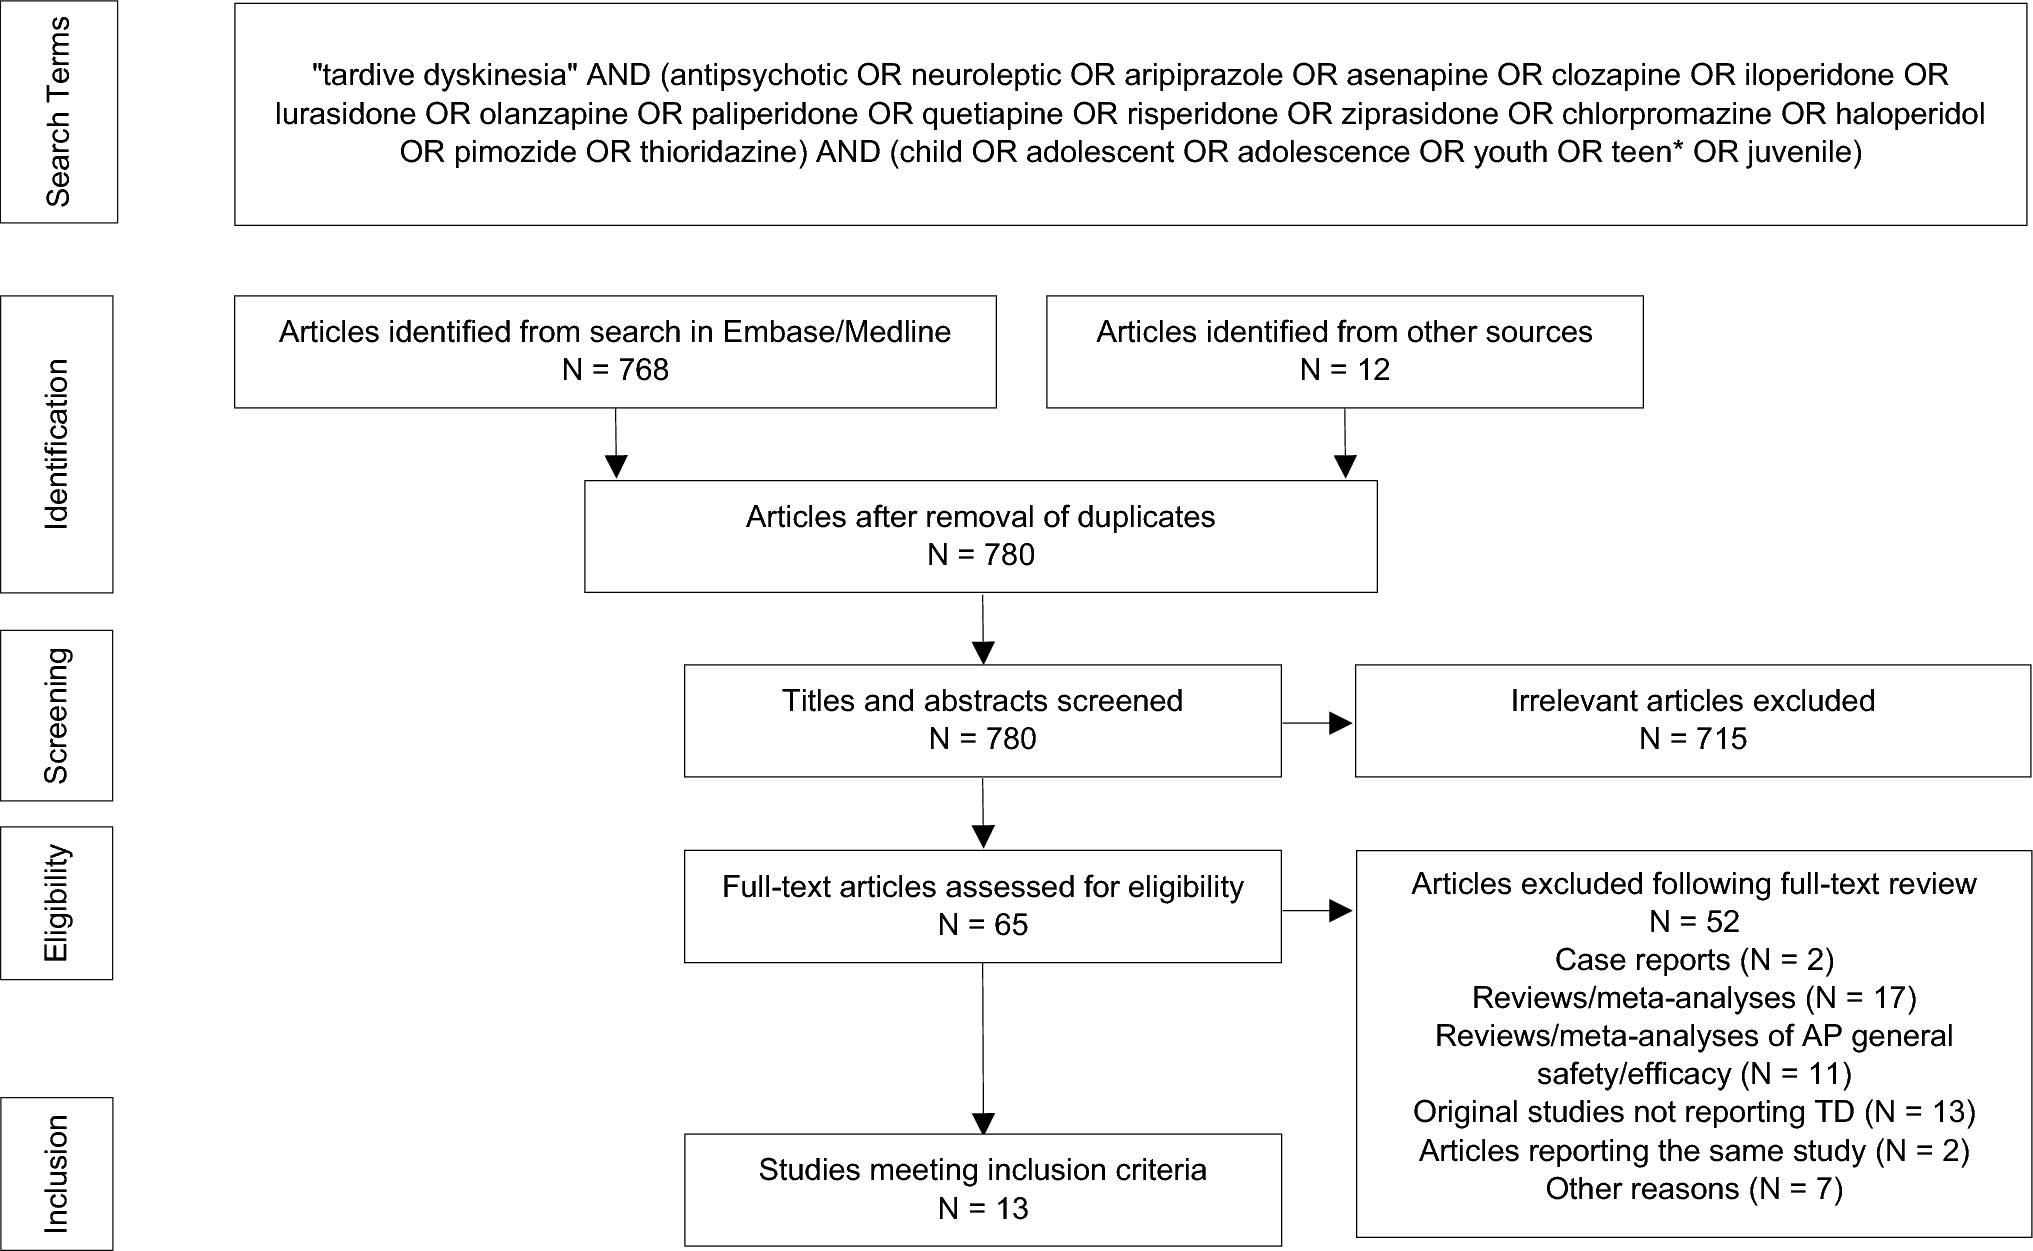 Tardive Dyskinesia with Antipsychotic Medication in Children and Adolescents: A Systematic Literature Review